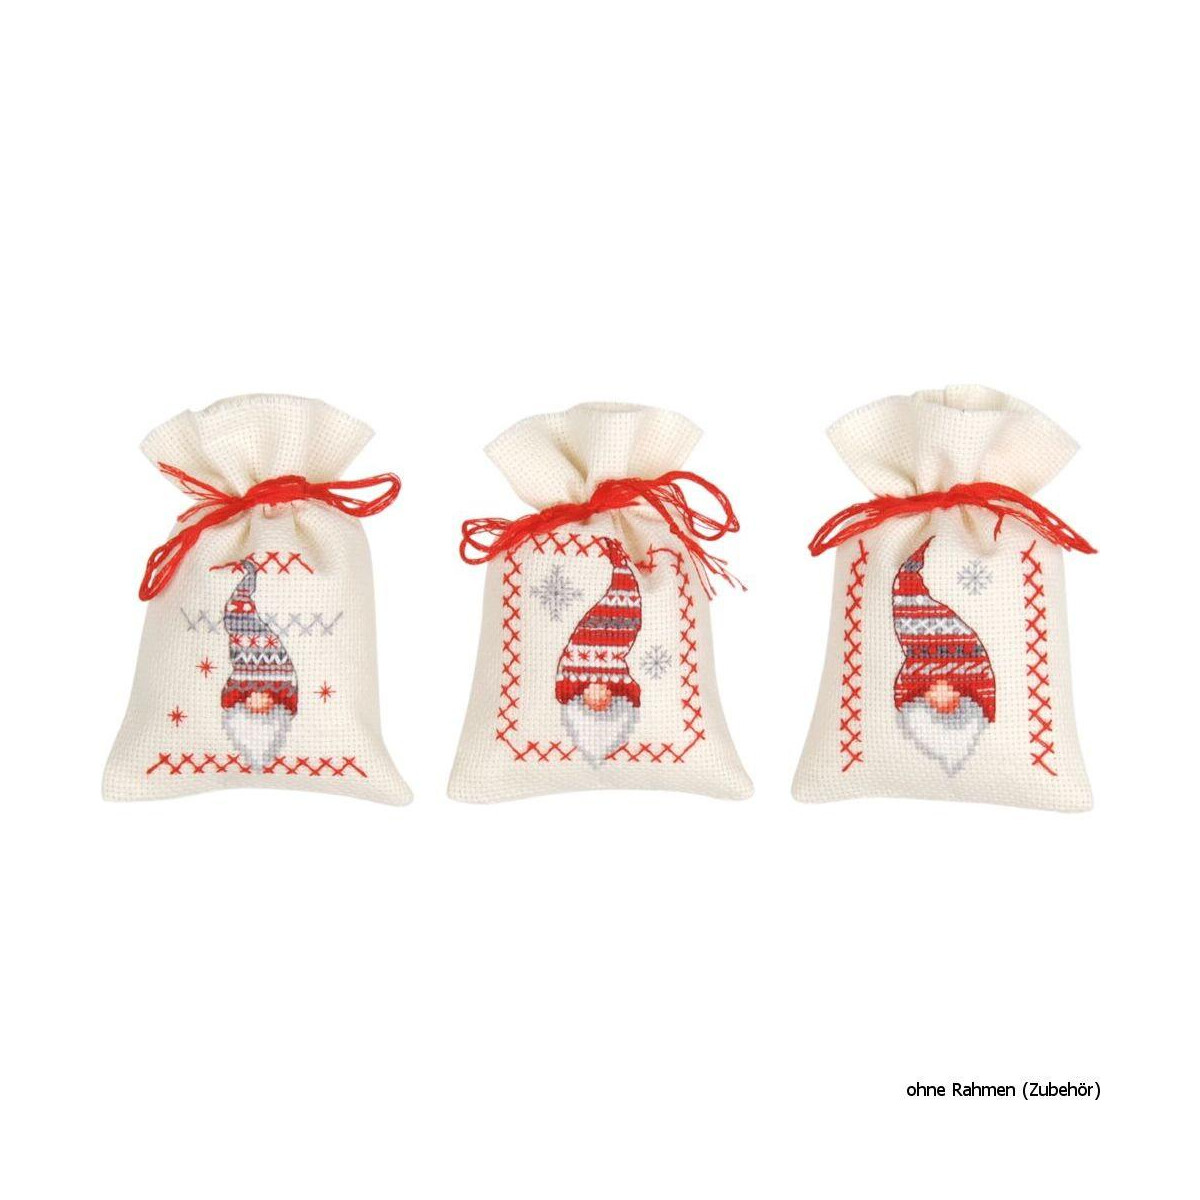 Vervaco counted herbal bags stitch kit Christmas gnomes...